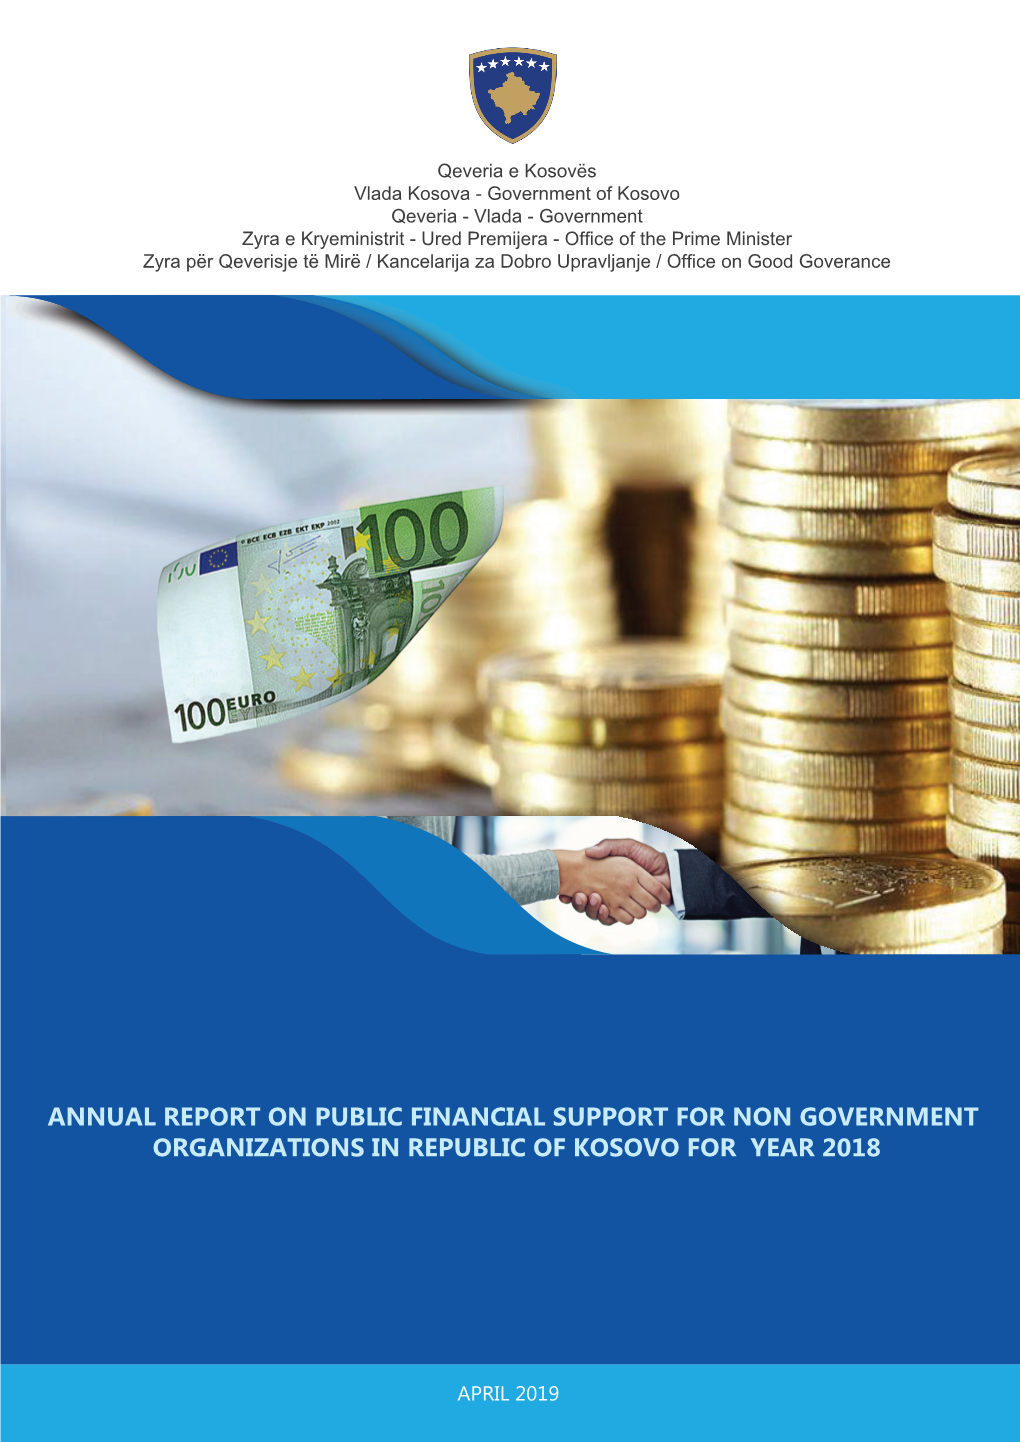 Annual Report on Public Financial Support for Non